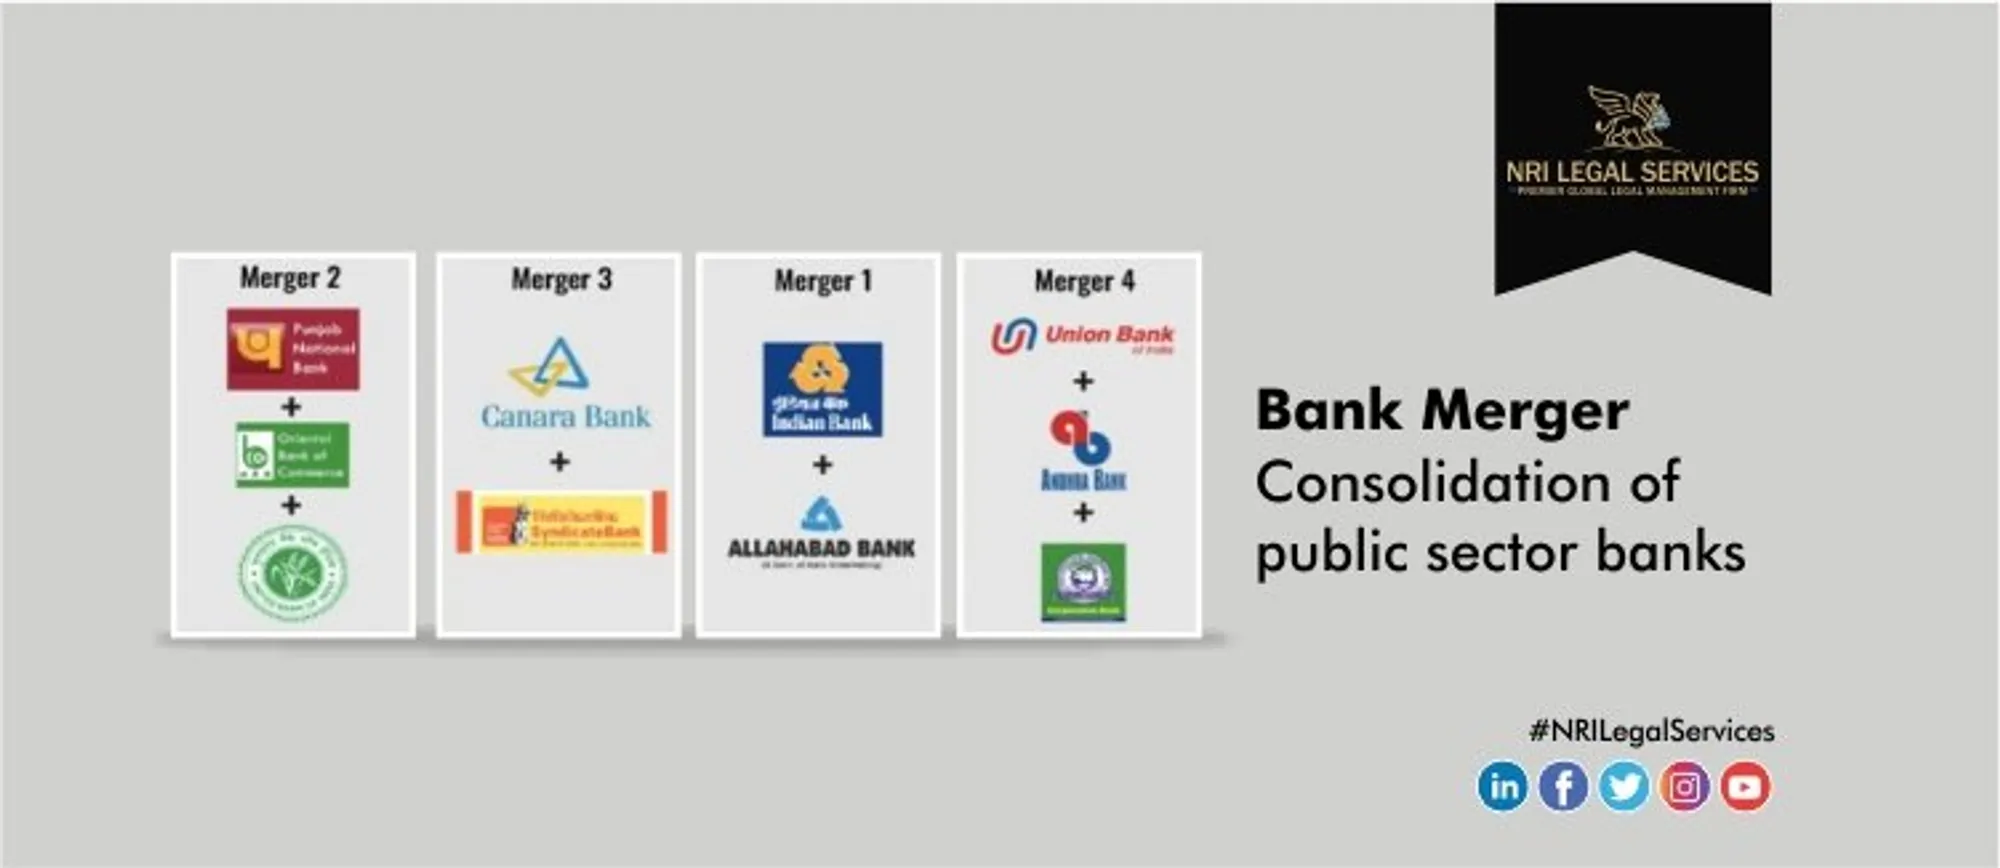 Bank Merger - Consolidation of public sector banks